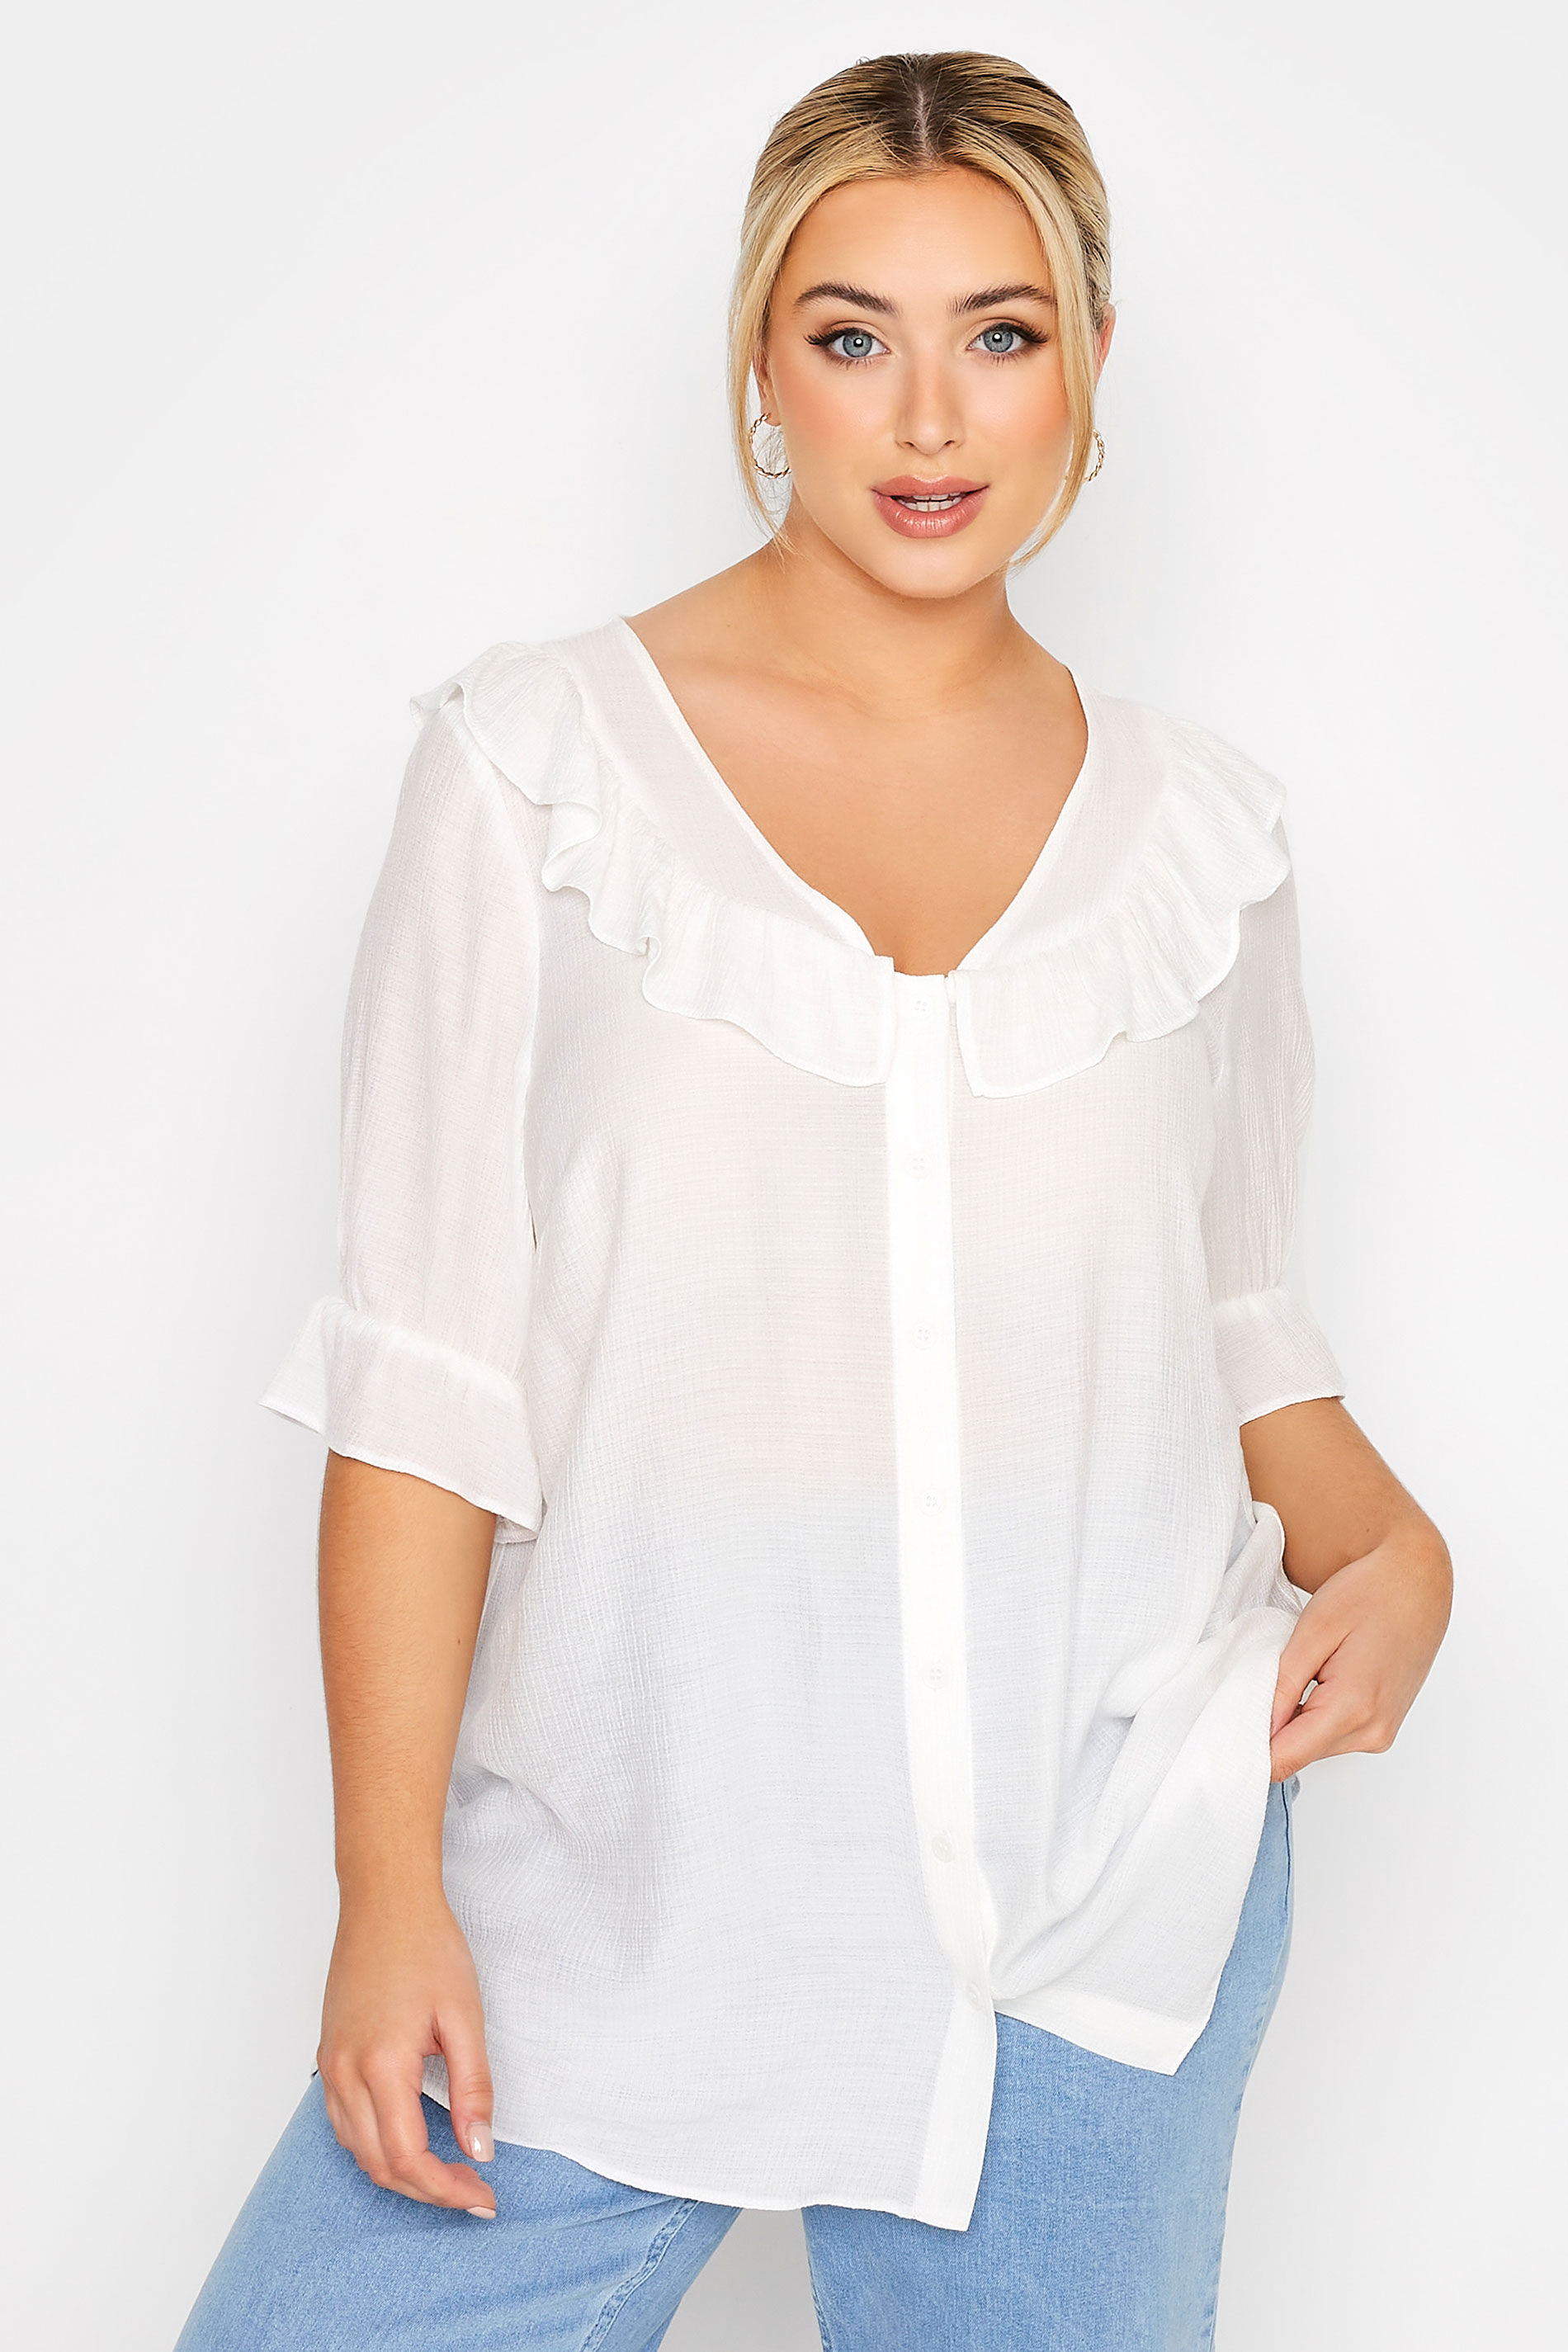 LIMITED COLLECTION Plus Size White Button Frill Blouse | Yours Clothing  1